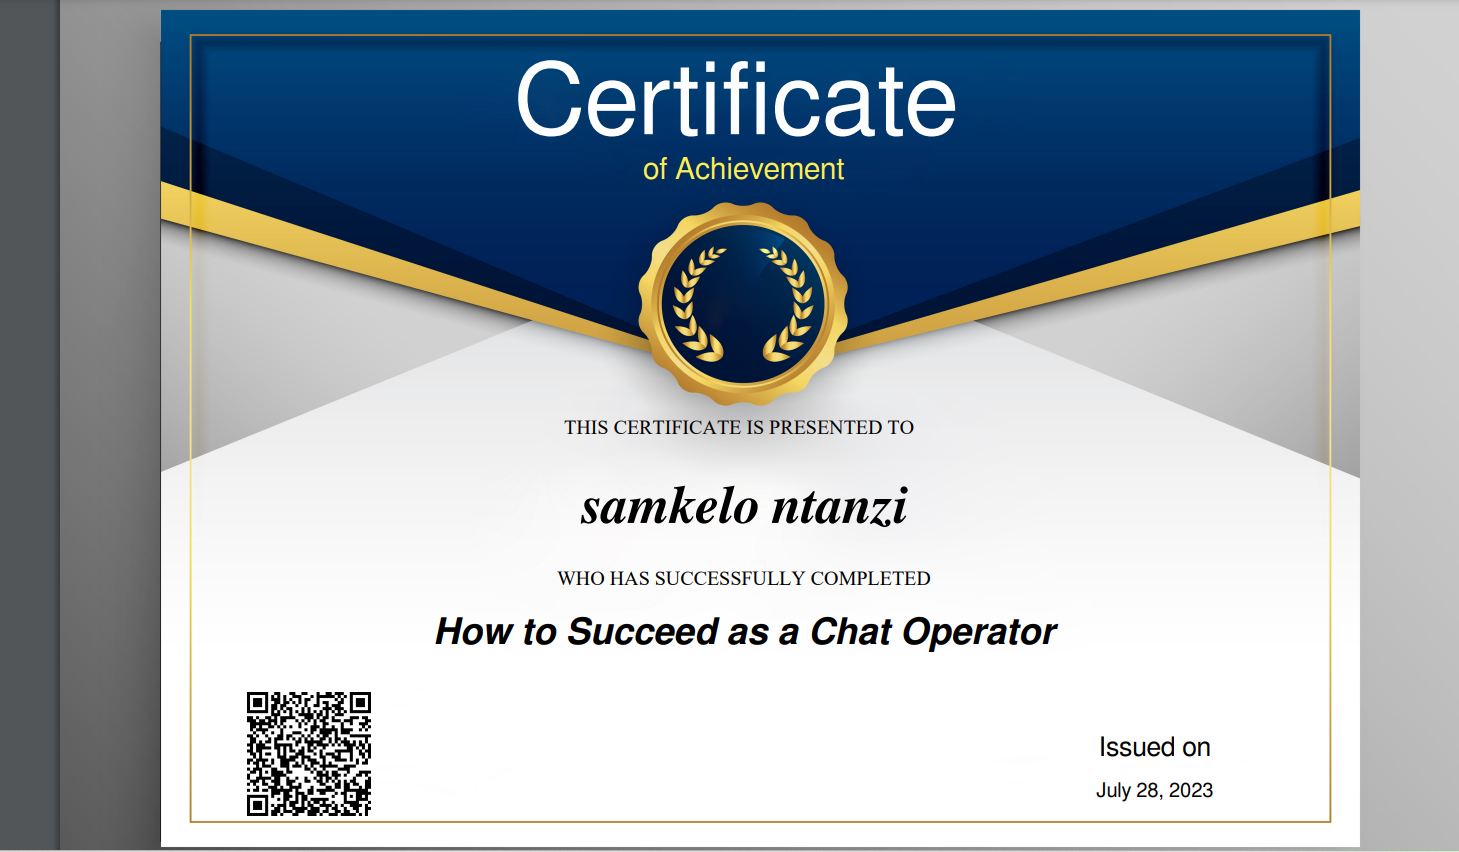 Certificate

of Achievement

       
   

THIS CERTIFICATE IS PRESENTED TO

samkelo ntanzi
WHO HAS SUCCESSFULLY COMPLETED

How to Succeed as a Chat Operator

Issued on

July 28,2023